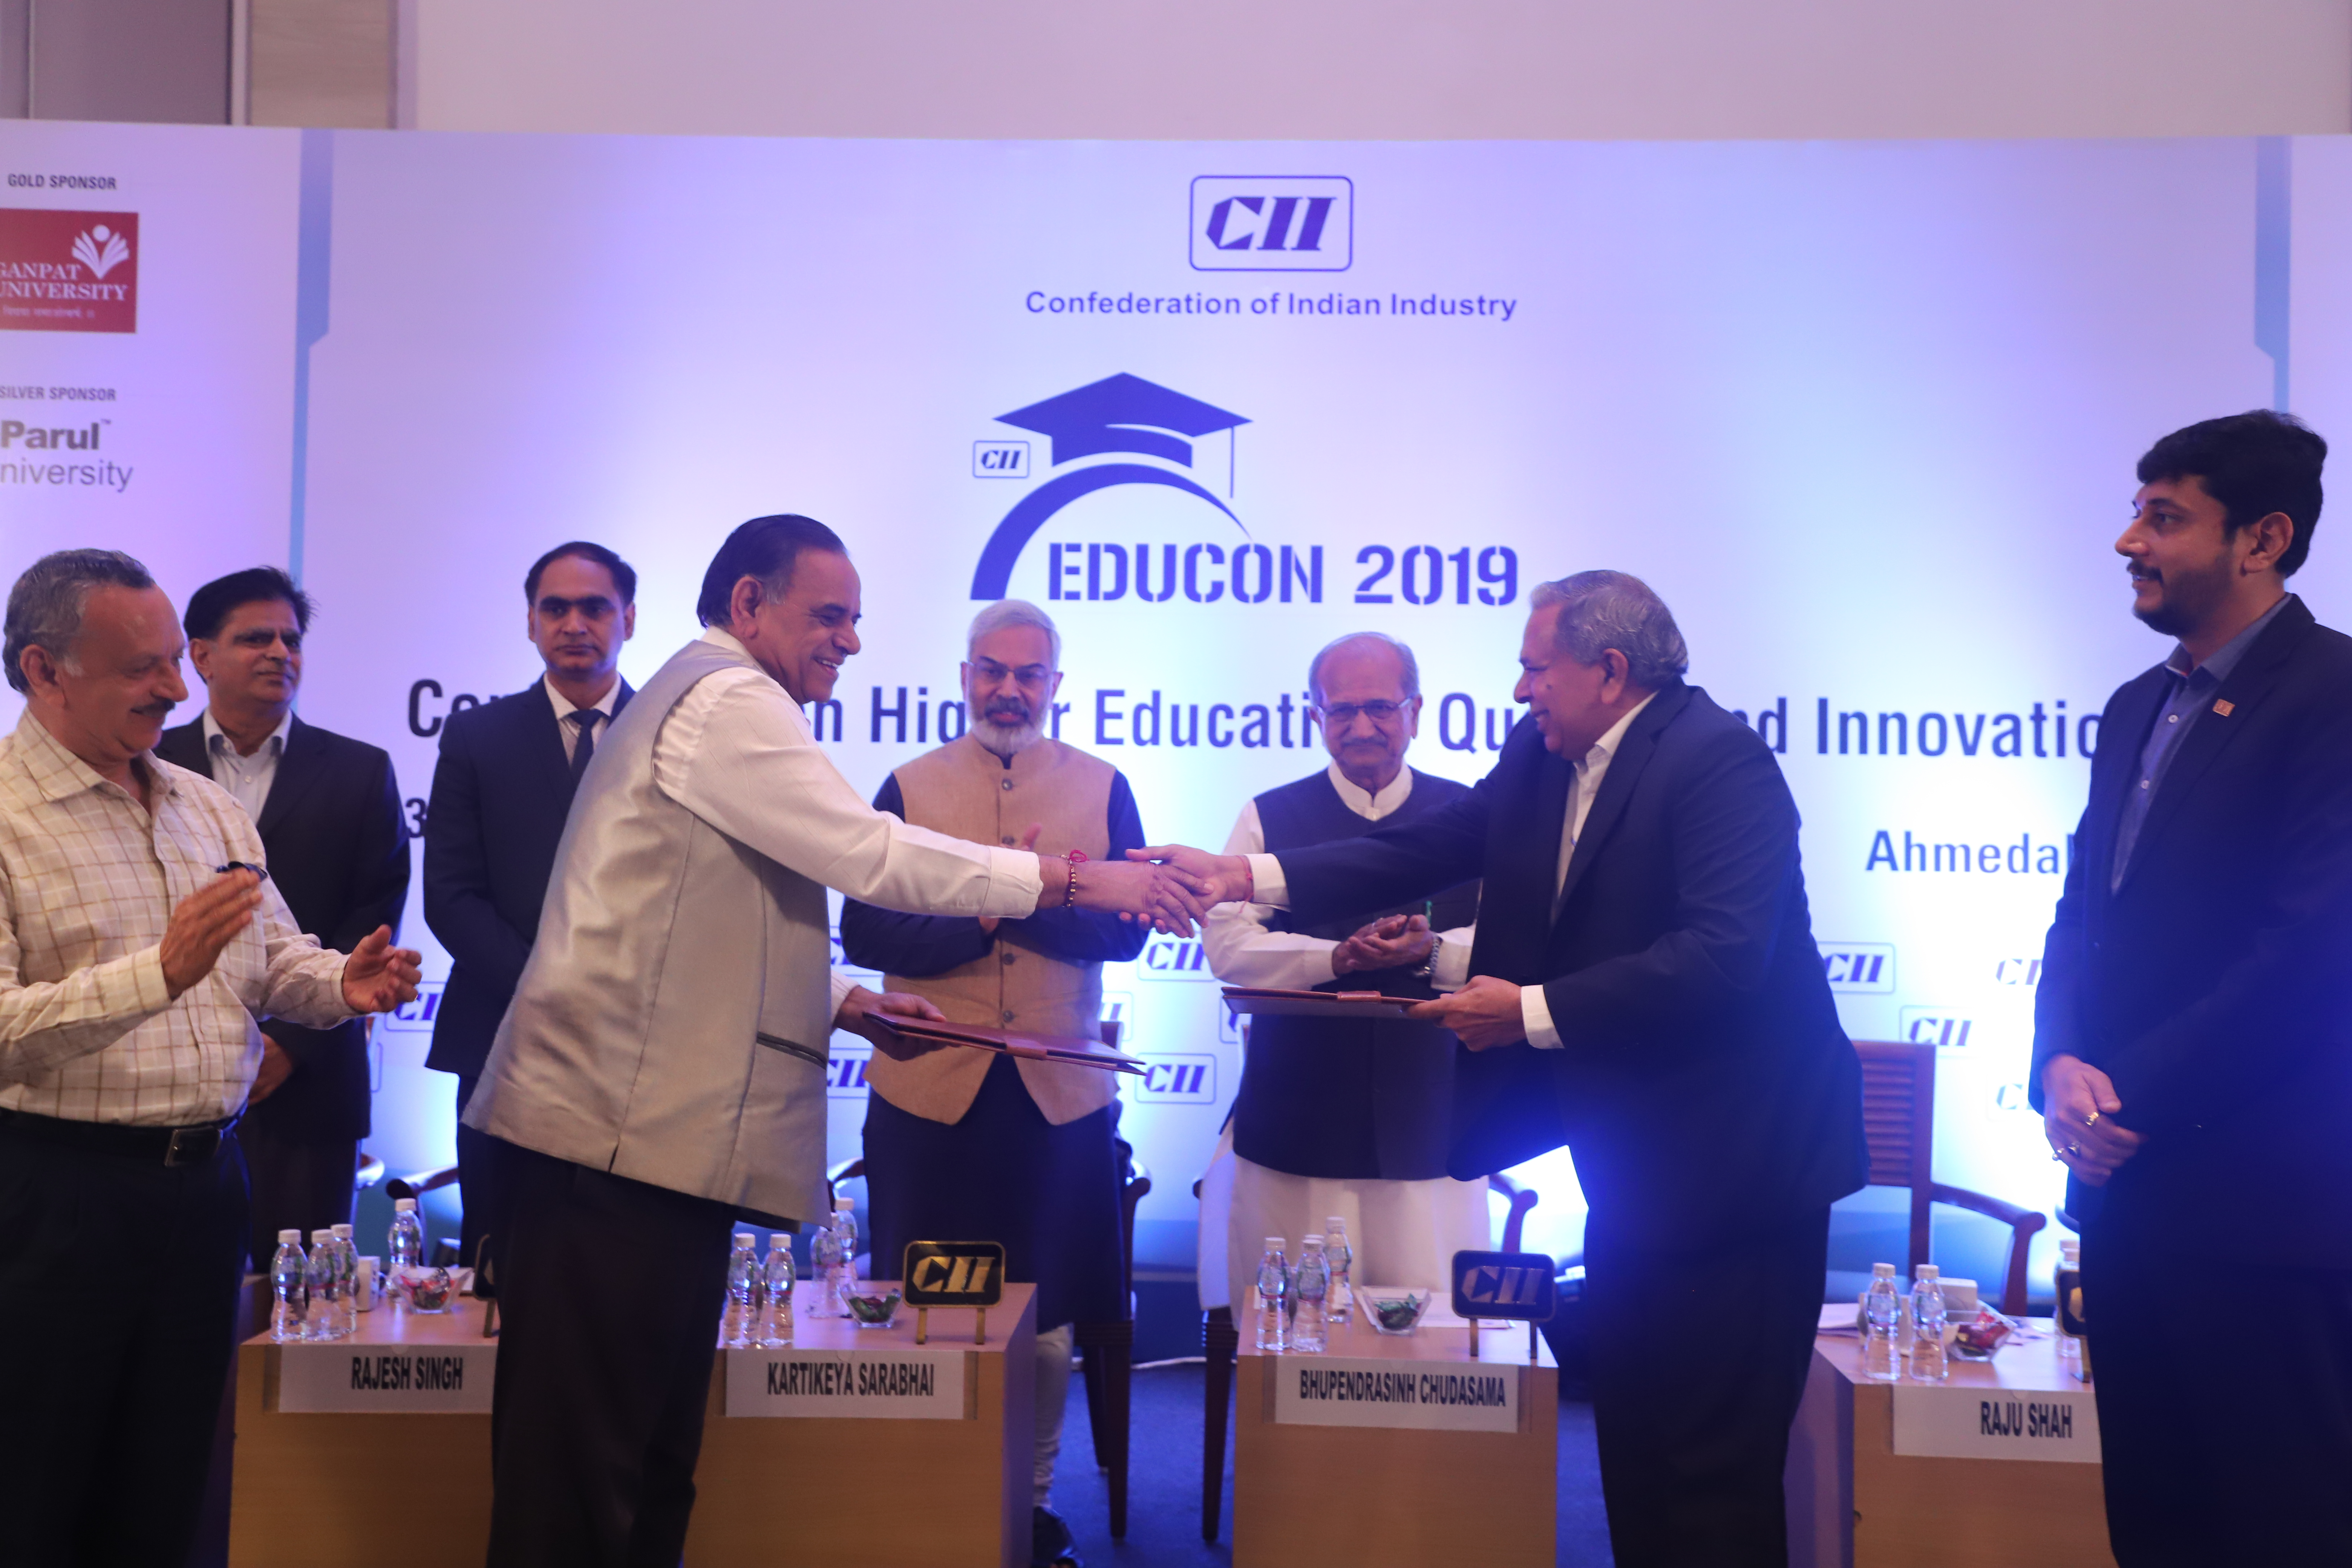 Parul University signed MoU with CII